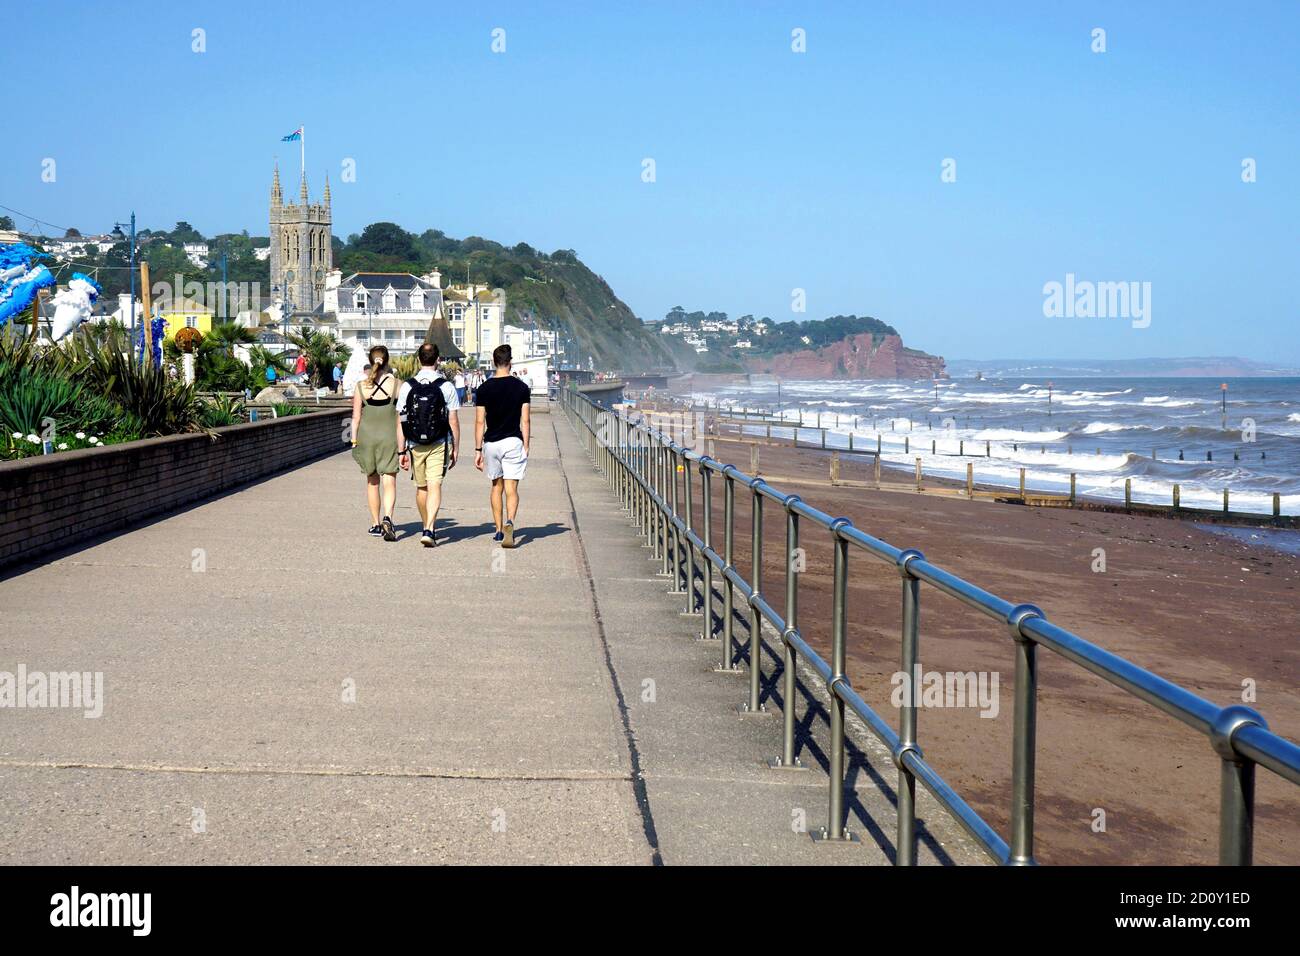 Teignmouth, Devon, UK. September 17, 2020.  Holidaymakers walking the promenade on a windy day at high tide at Teignmouth in Devon, UK. Stock Photo